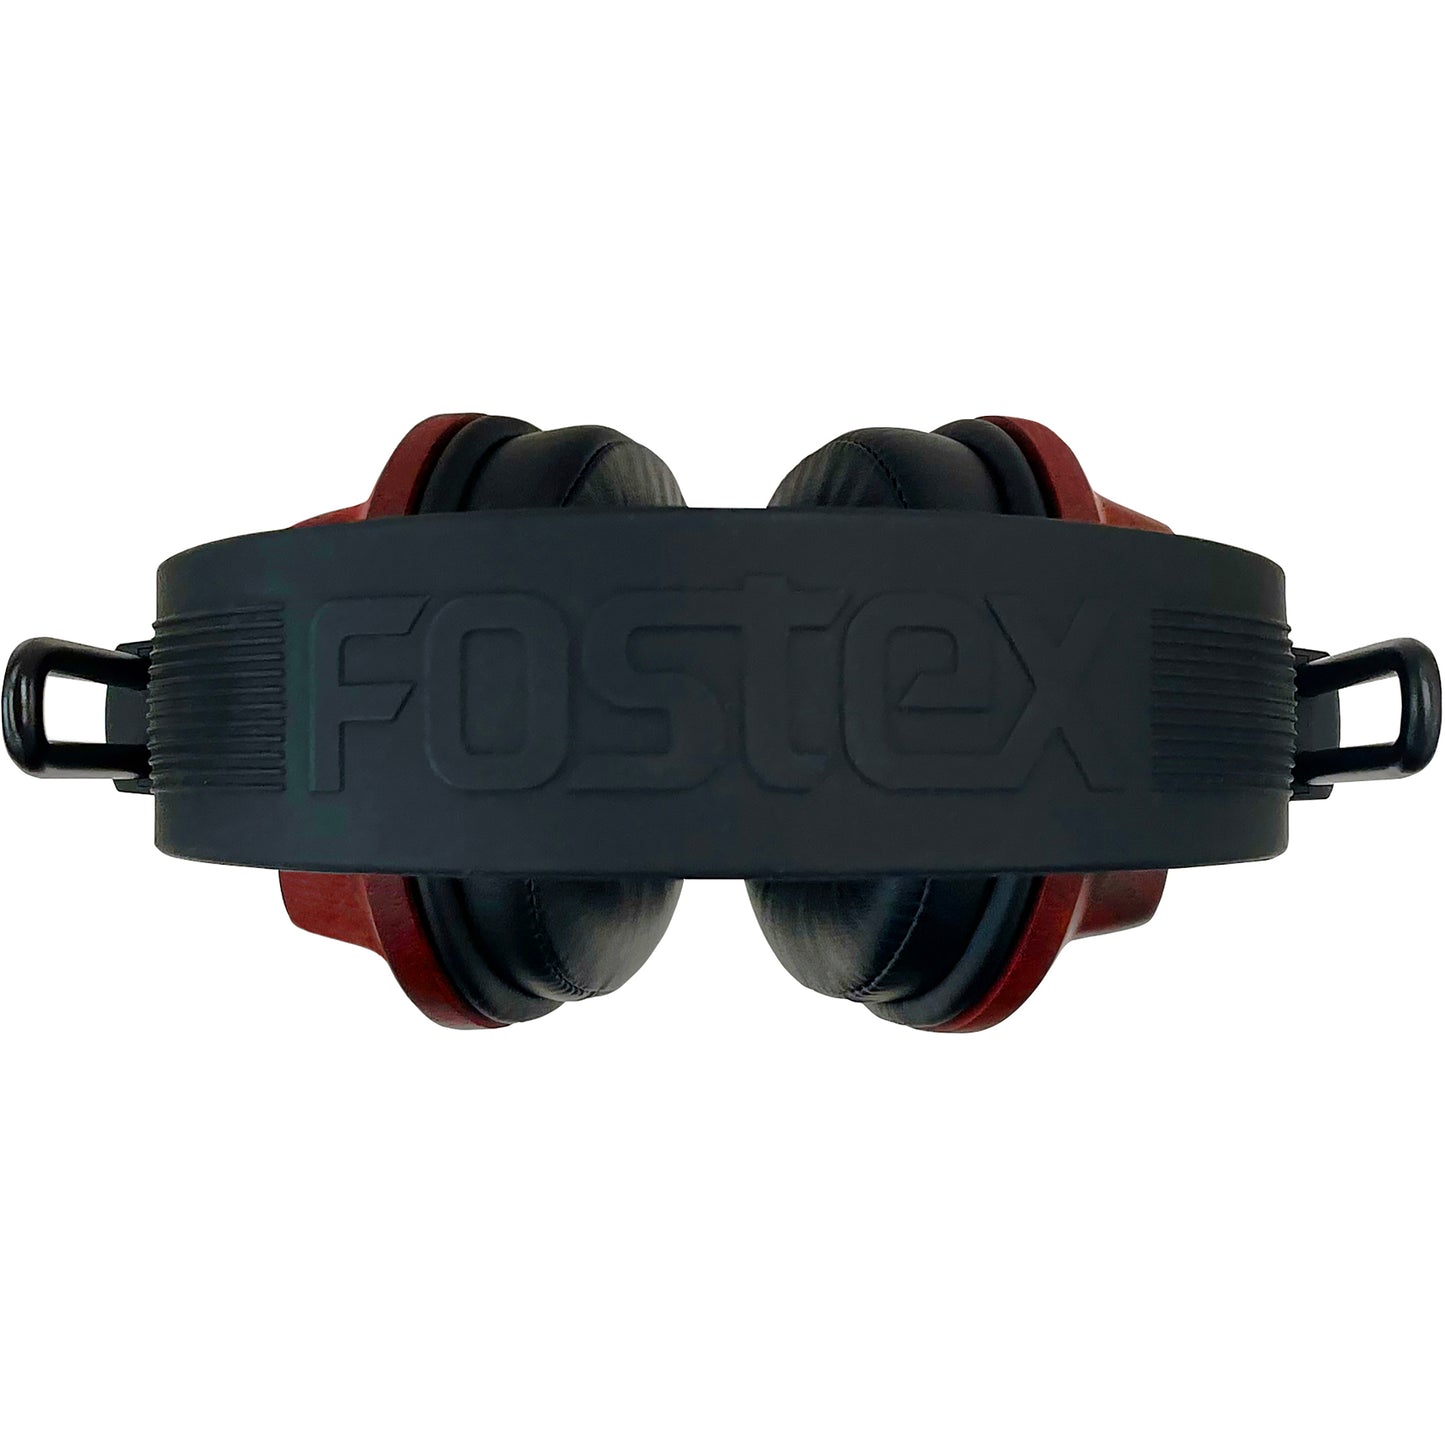 Fostex T60RP Headphones Limited 50th Anniversary Edition